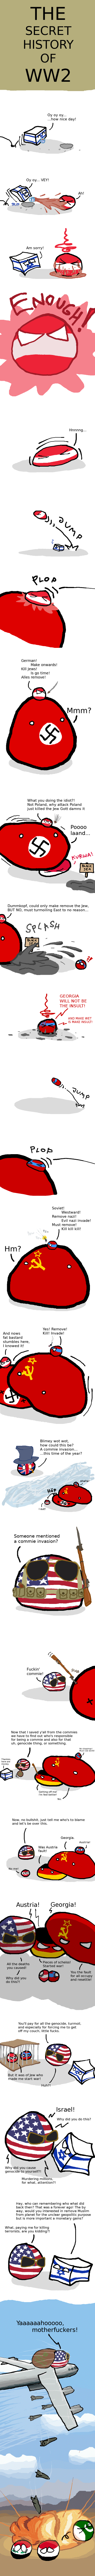 again times 3 another countryballs comic Blank Meme Template